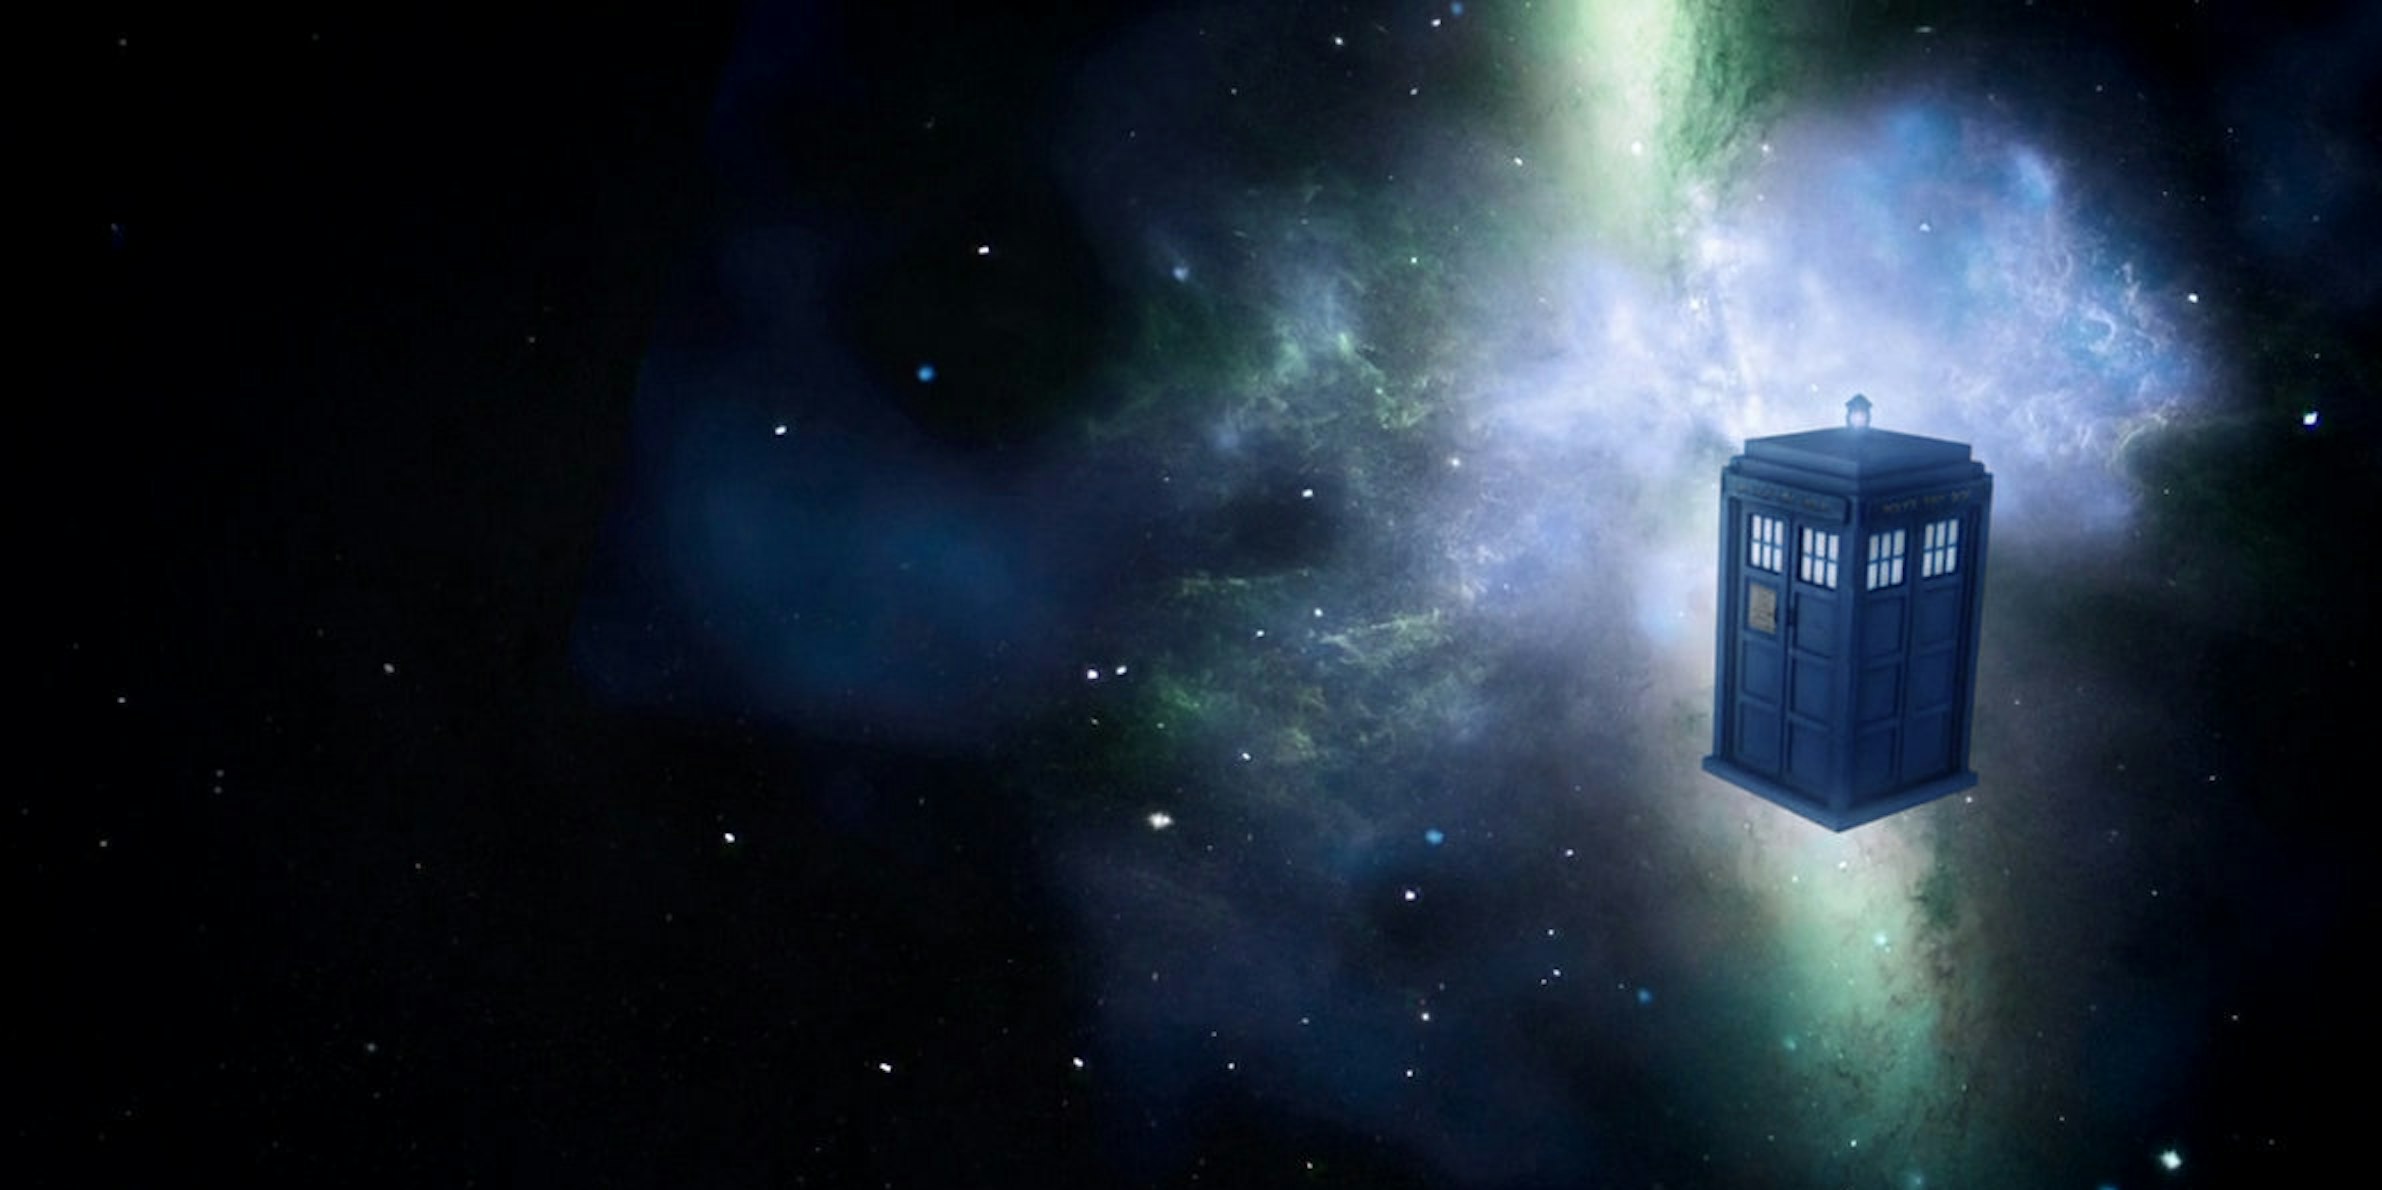 Doctor Who's Tardis is England's most prominent modern time machine.